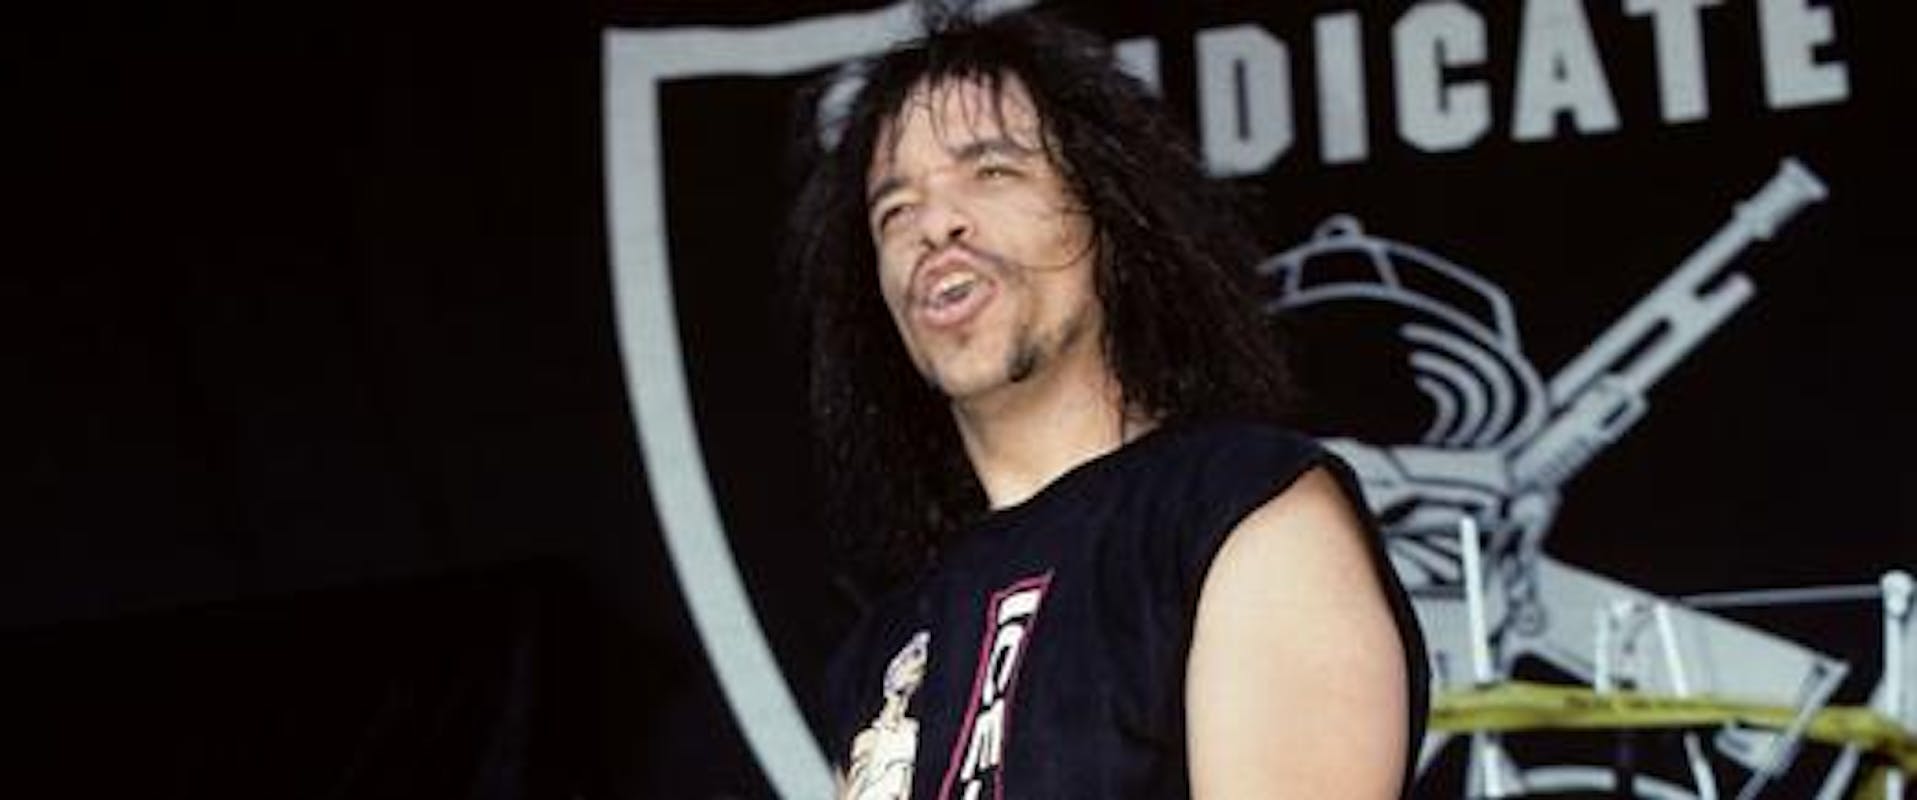 Ice-T performing his 1991 heavy metal track "Cop Killer"